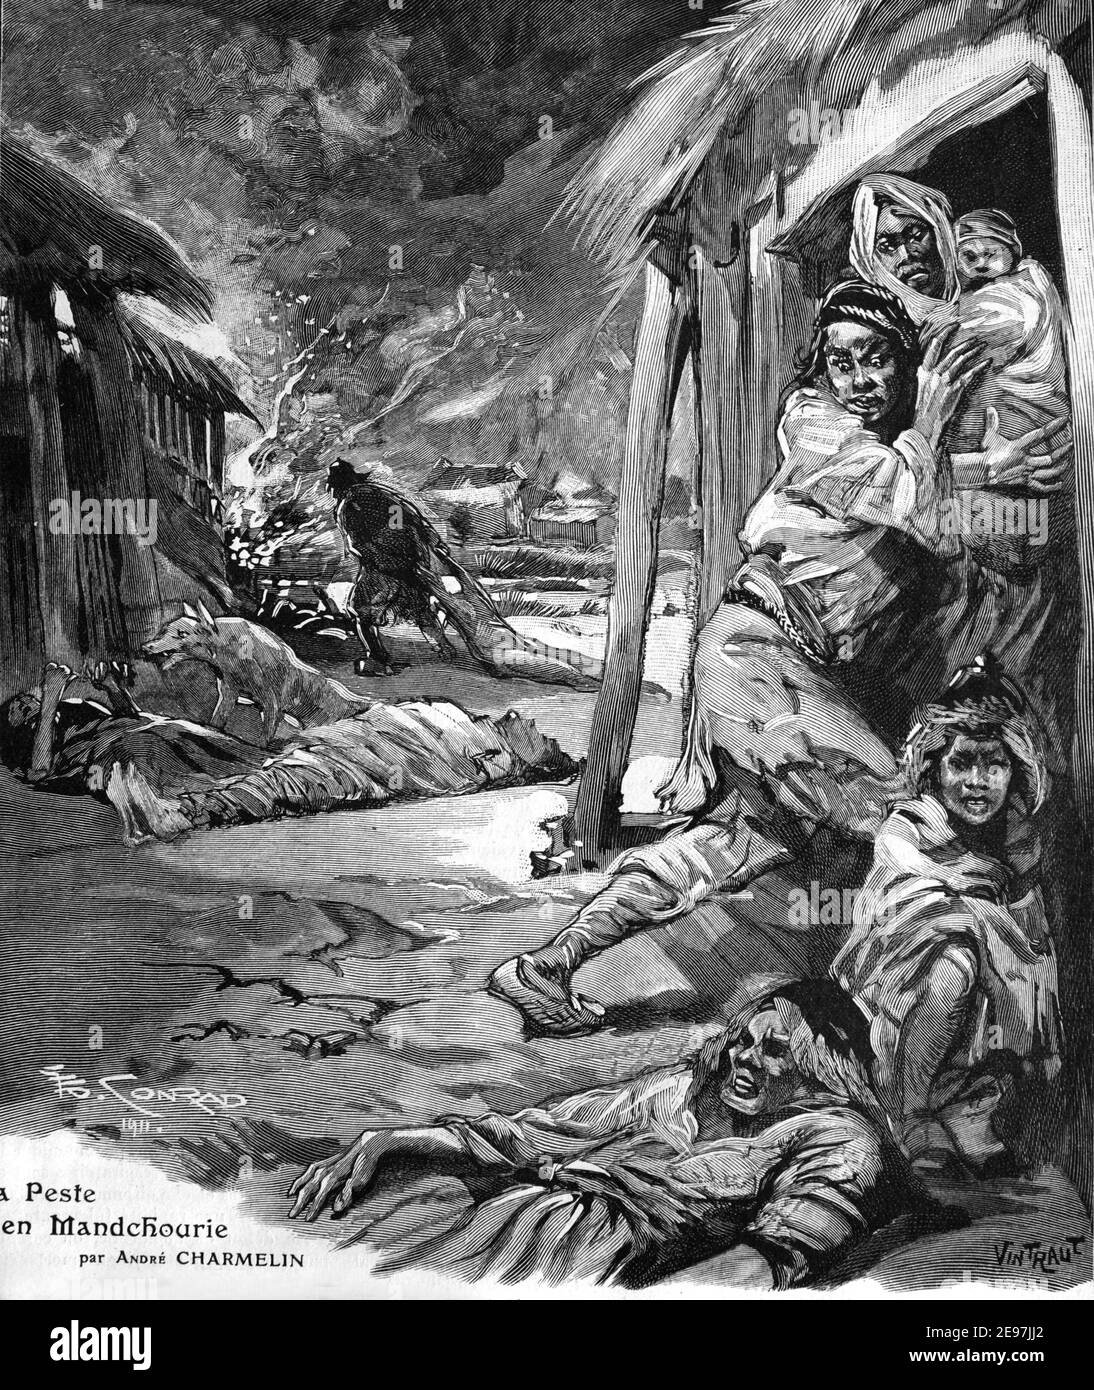 The Plague in Manchuria Russia & China 1911 Vintage Illustration or Engraving Stock Photo